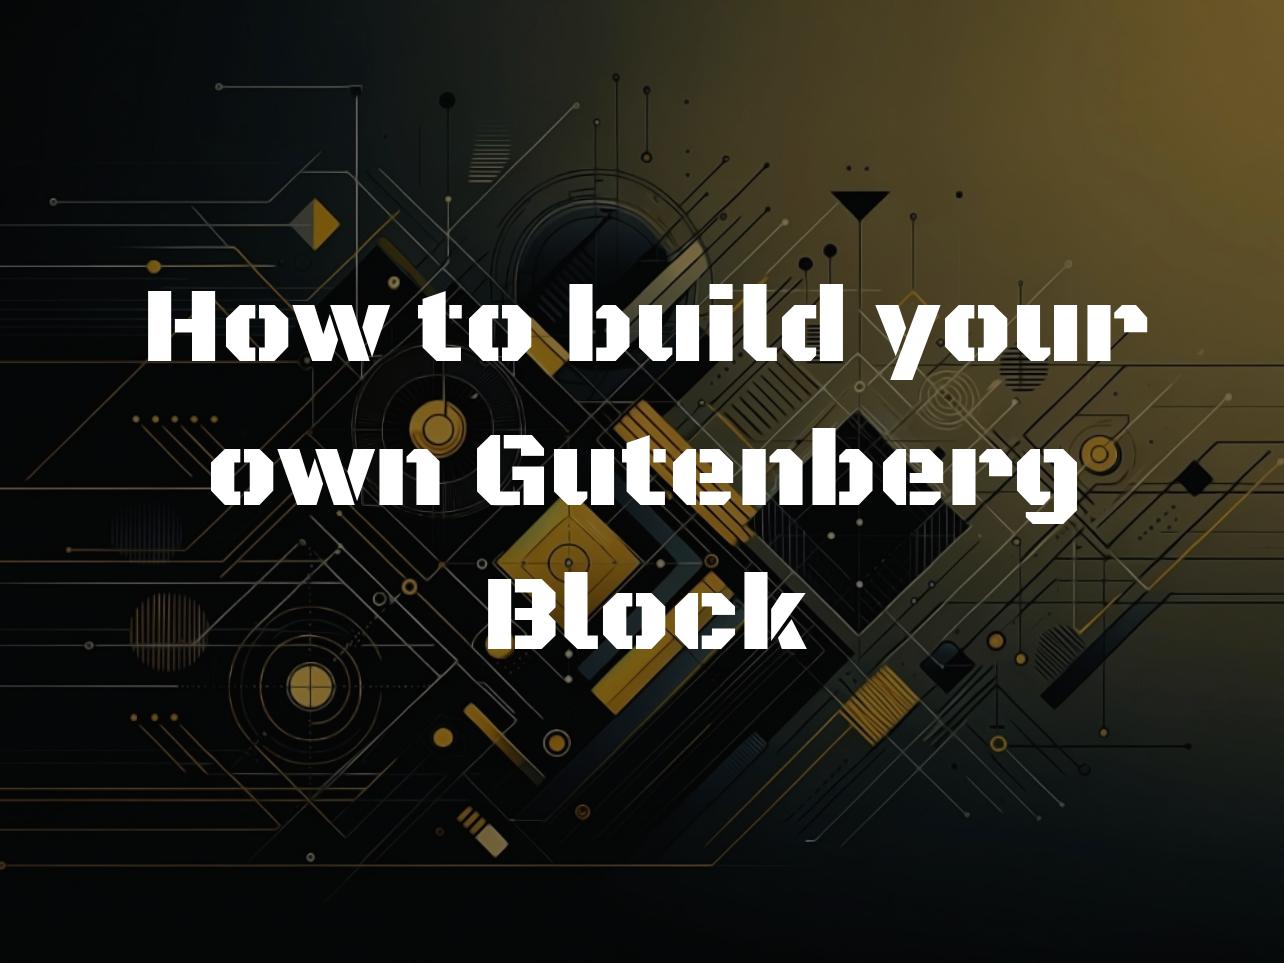 How to build your own Gutenberg Block